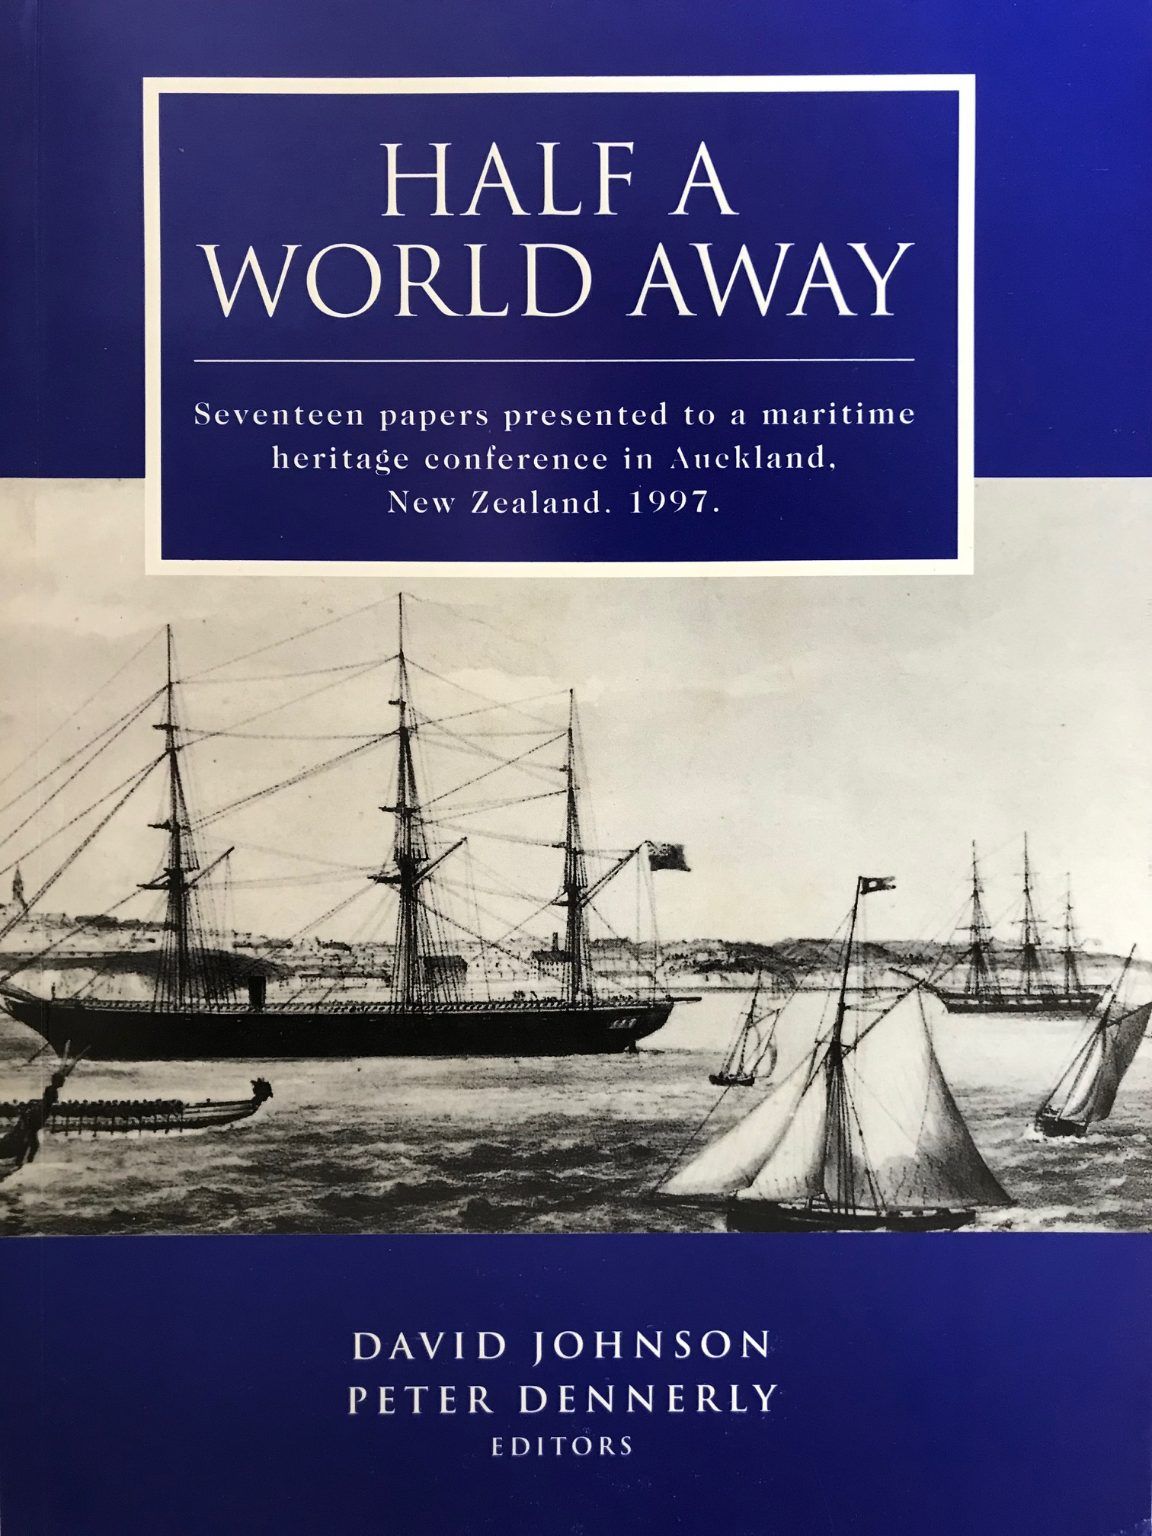 HALF A WORLD AWAY: Maritime Heritage Conference In Auckland, New Zealand